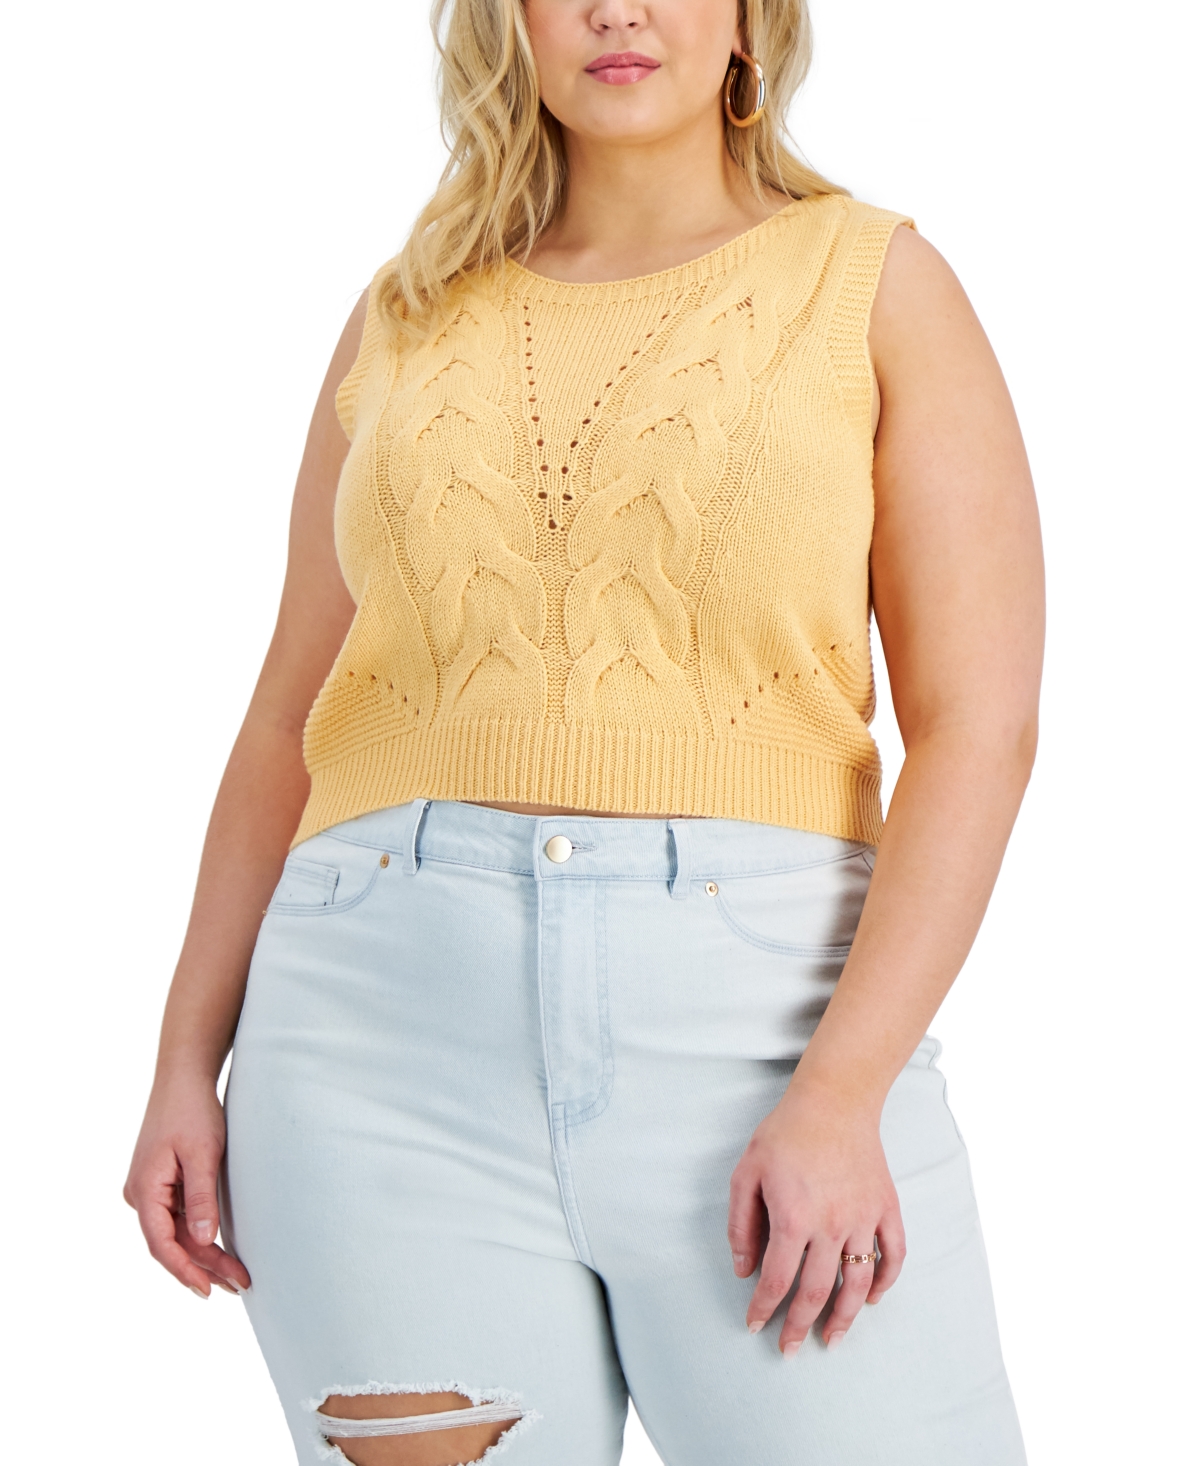 Full Circle Trends Trendy Plus Size Cropped Novelty Cable-Front Sweater Vest